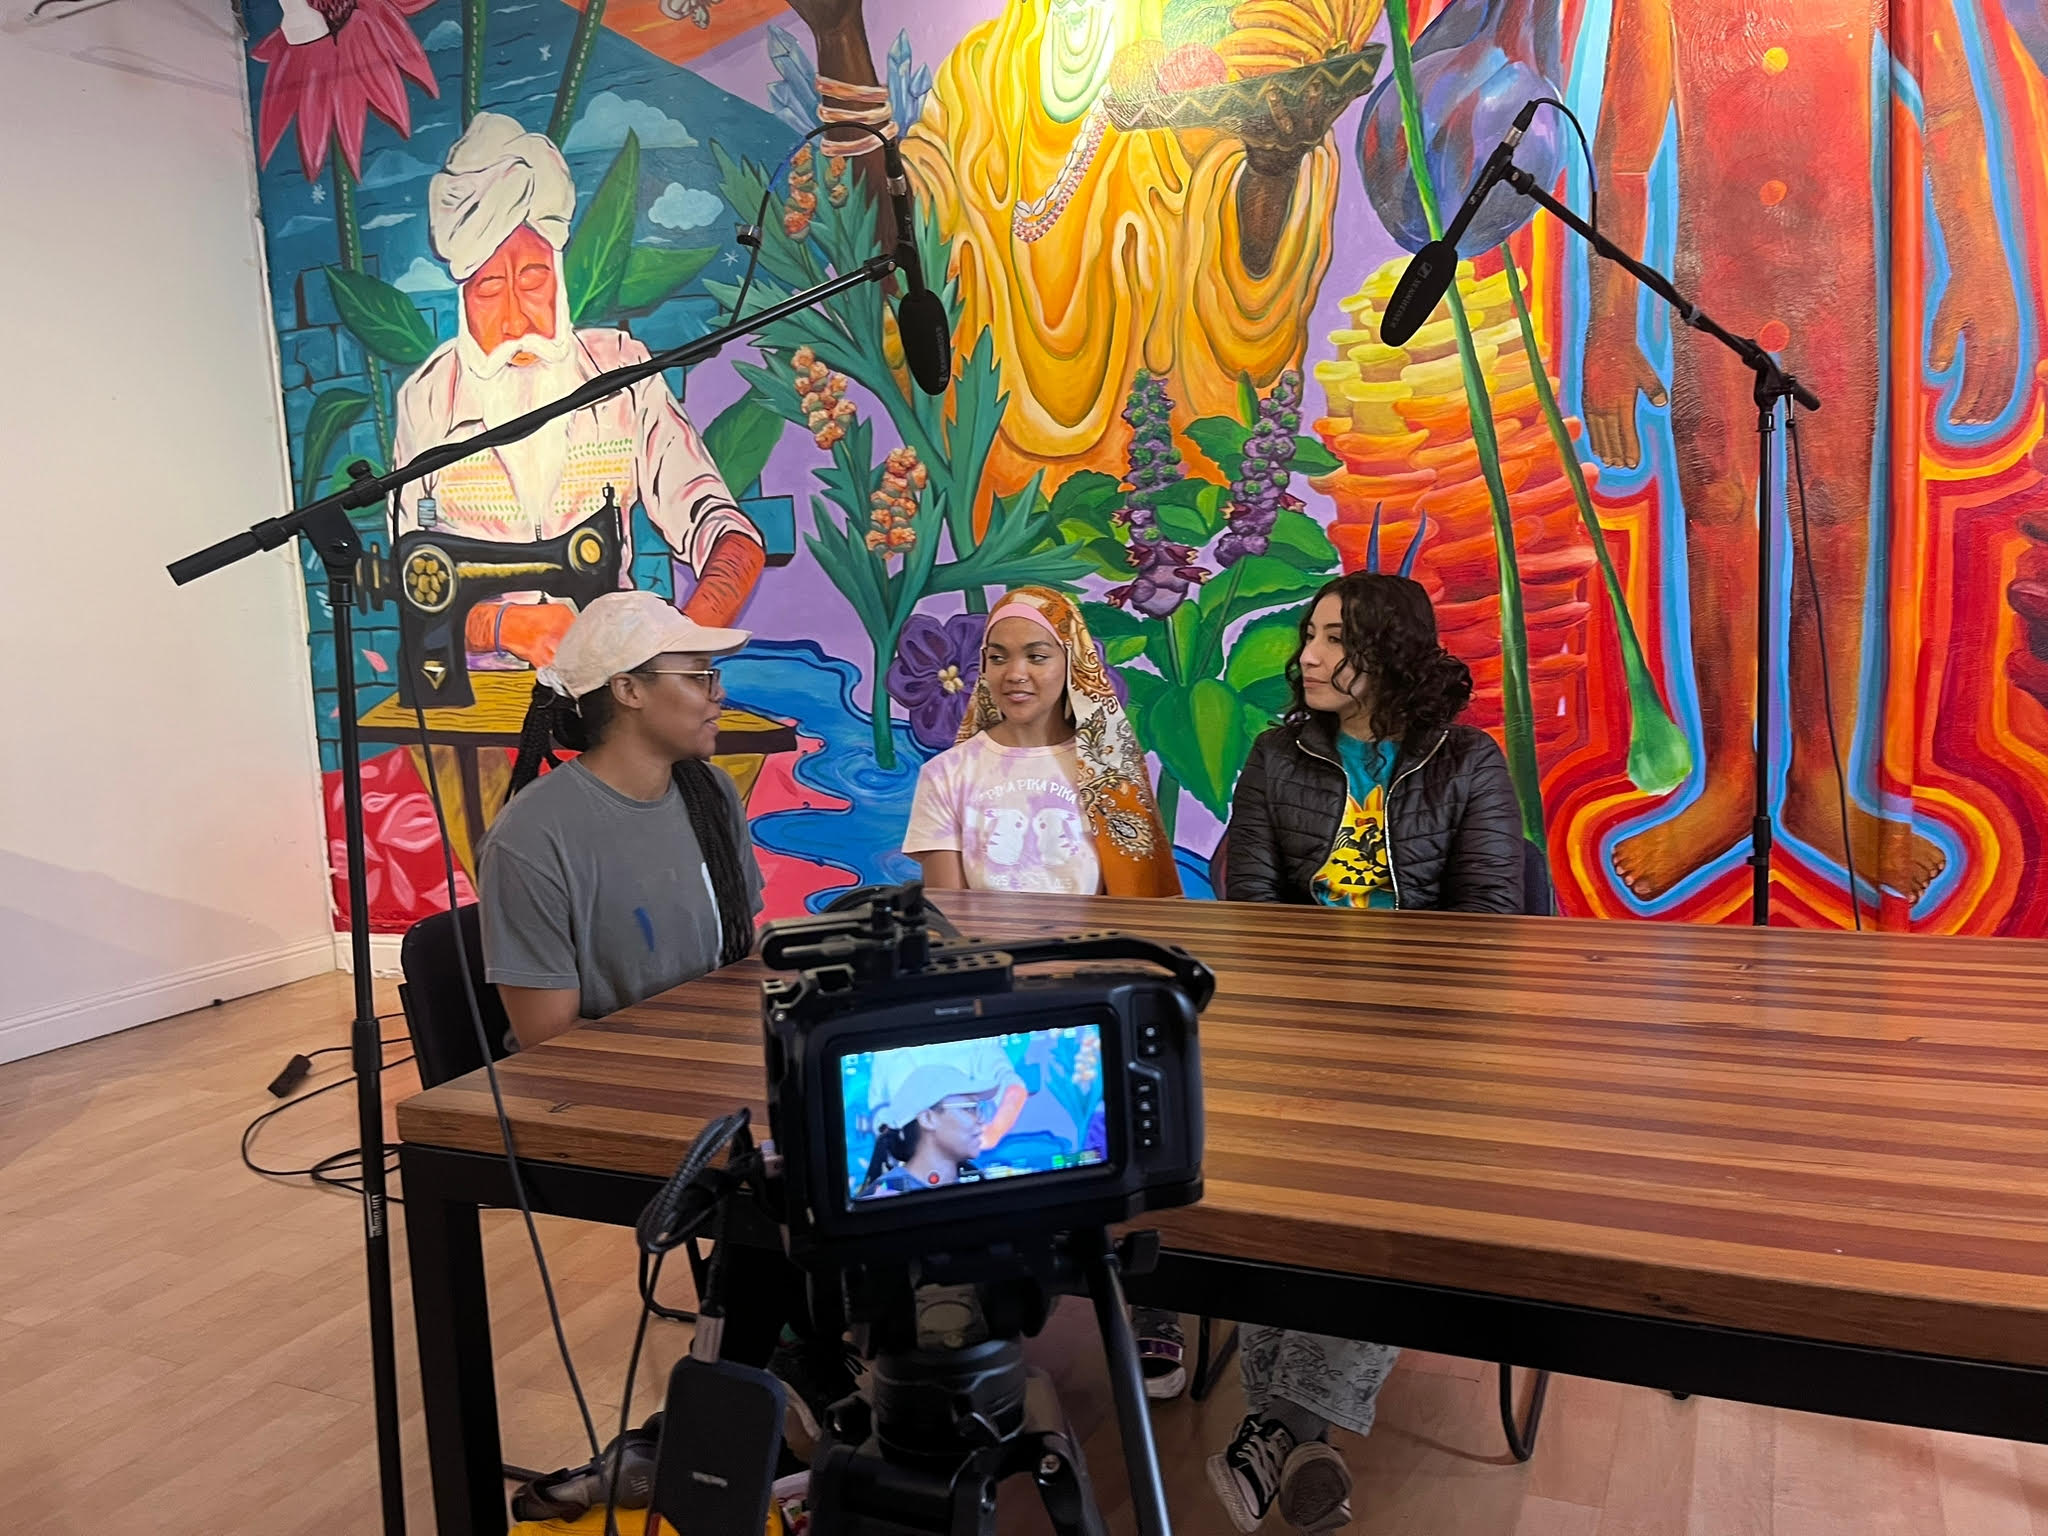 Three artists sit at a table during the filming of a documentary.